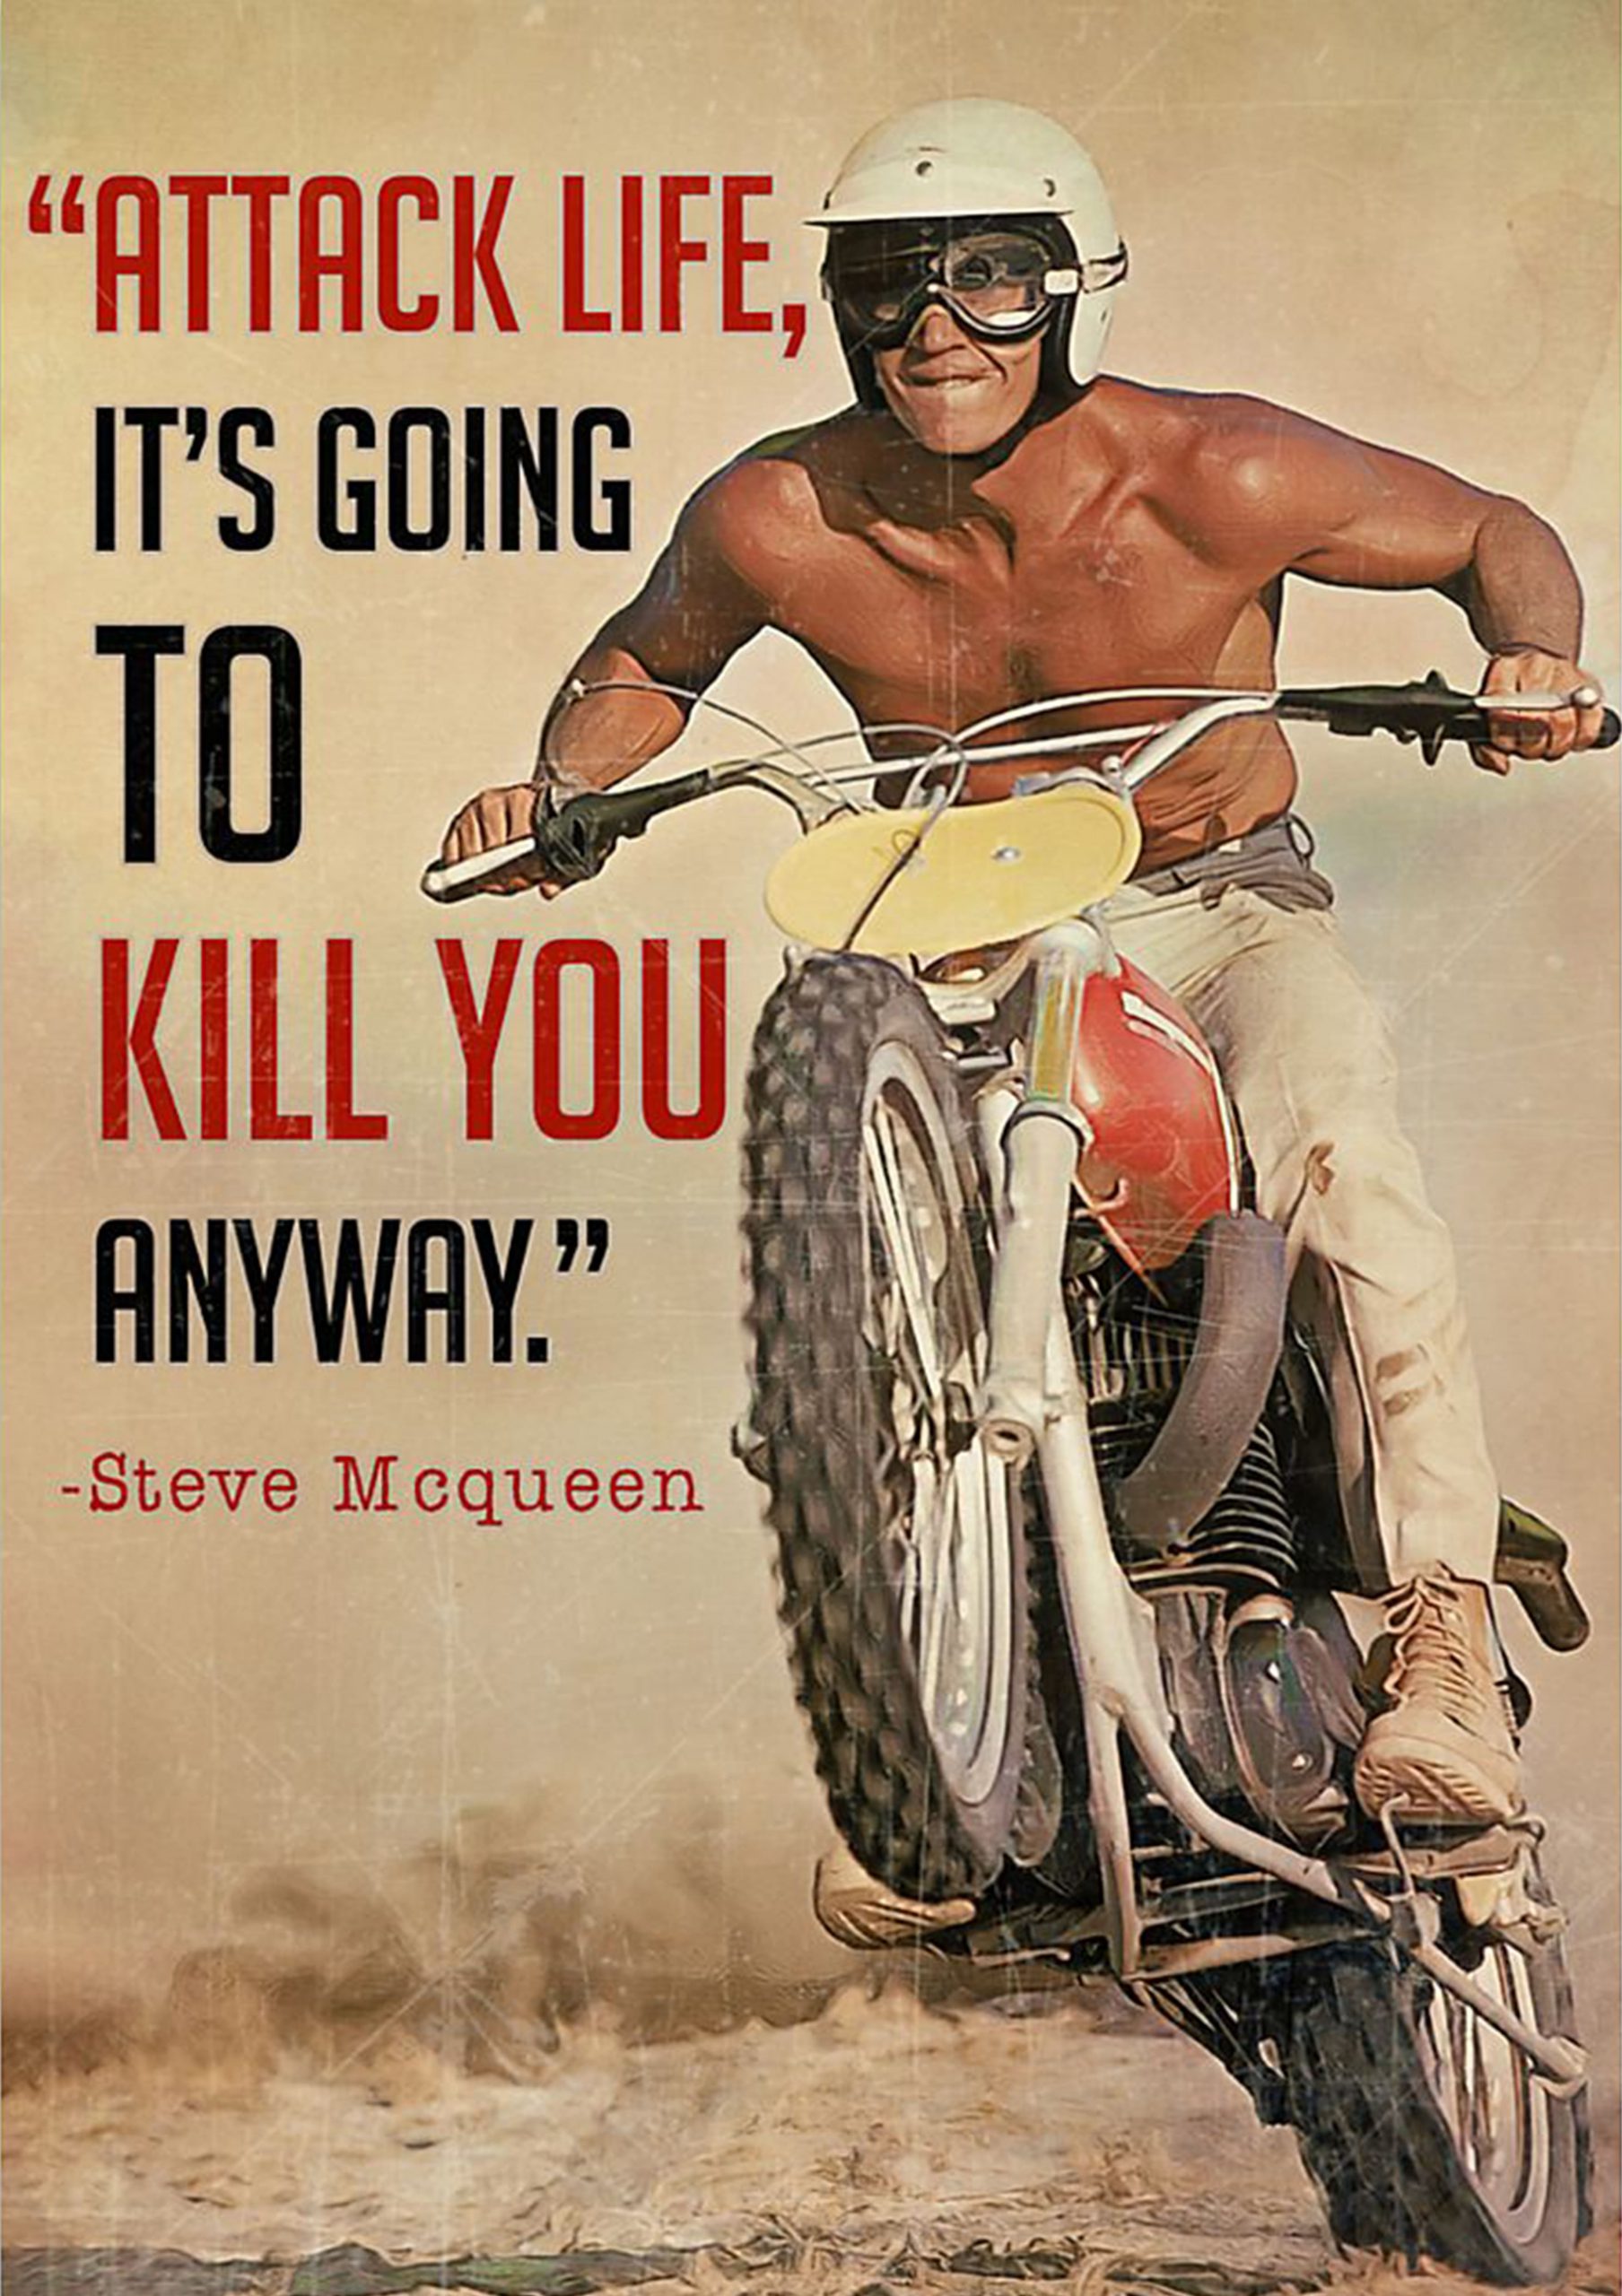 vintage attack life its going to kill you anyway poster 1 - Copy (3)